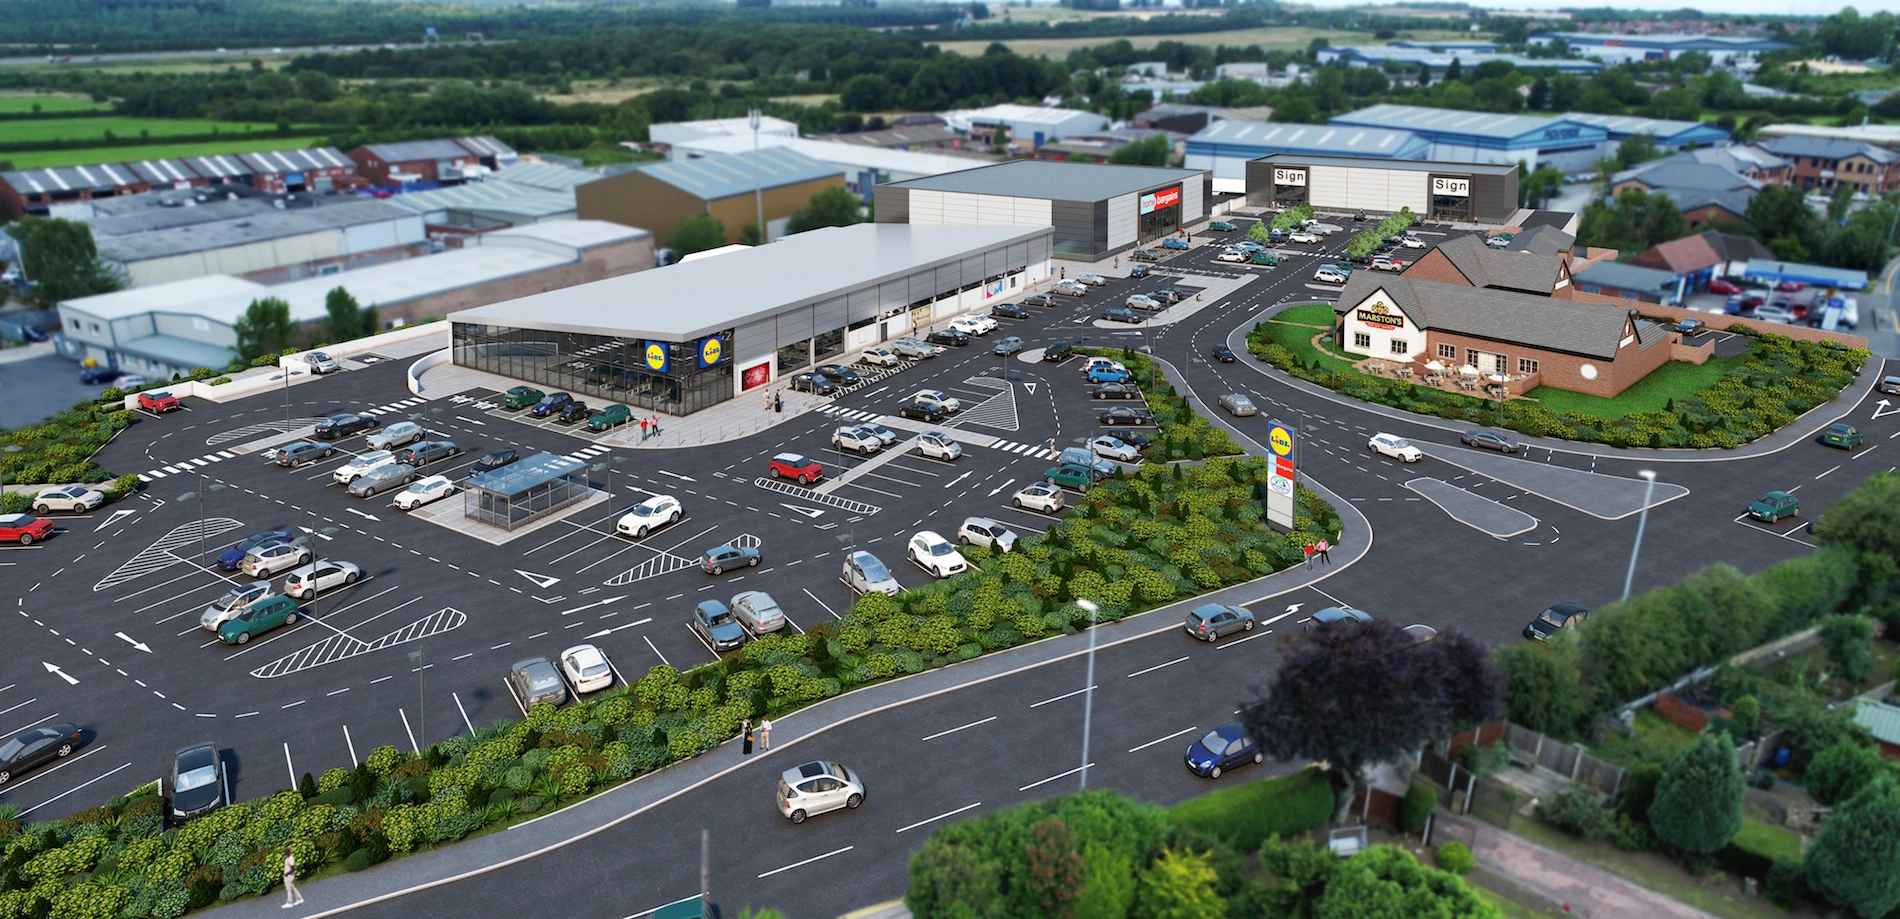 East Side Retail Park in Garforth. 